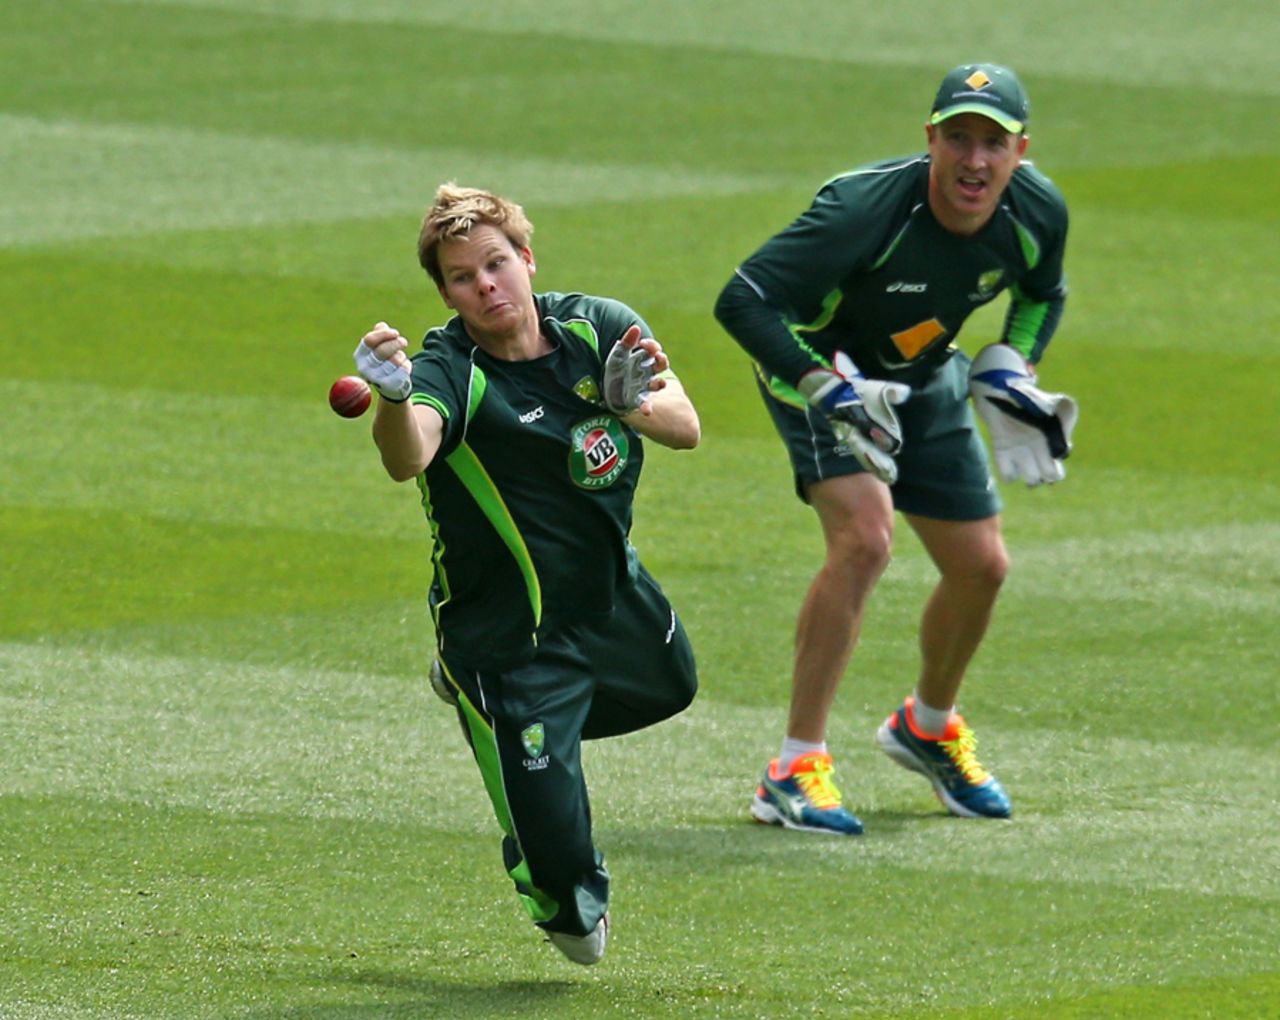 Steven Smith dives for the ball during a fielding drill, Melbourne, December 24, 2013